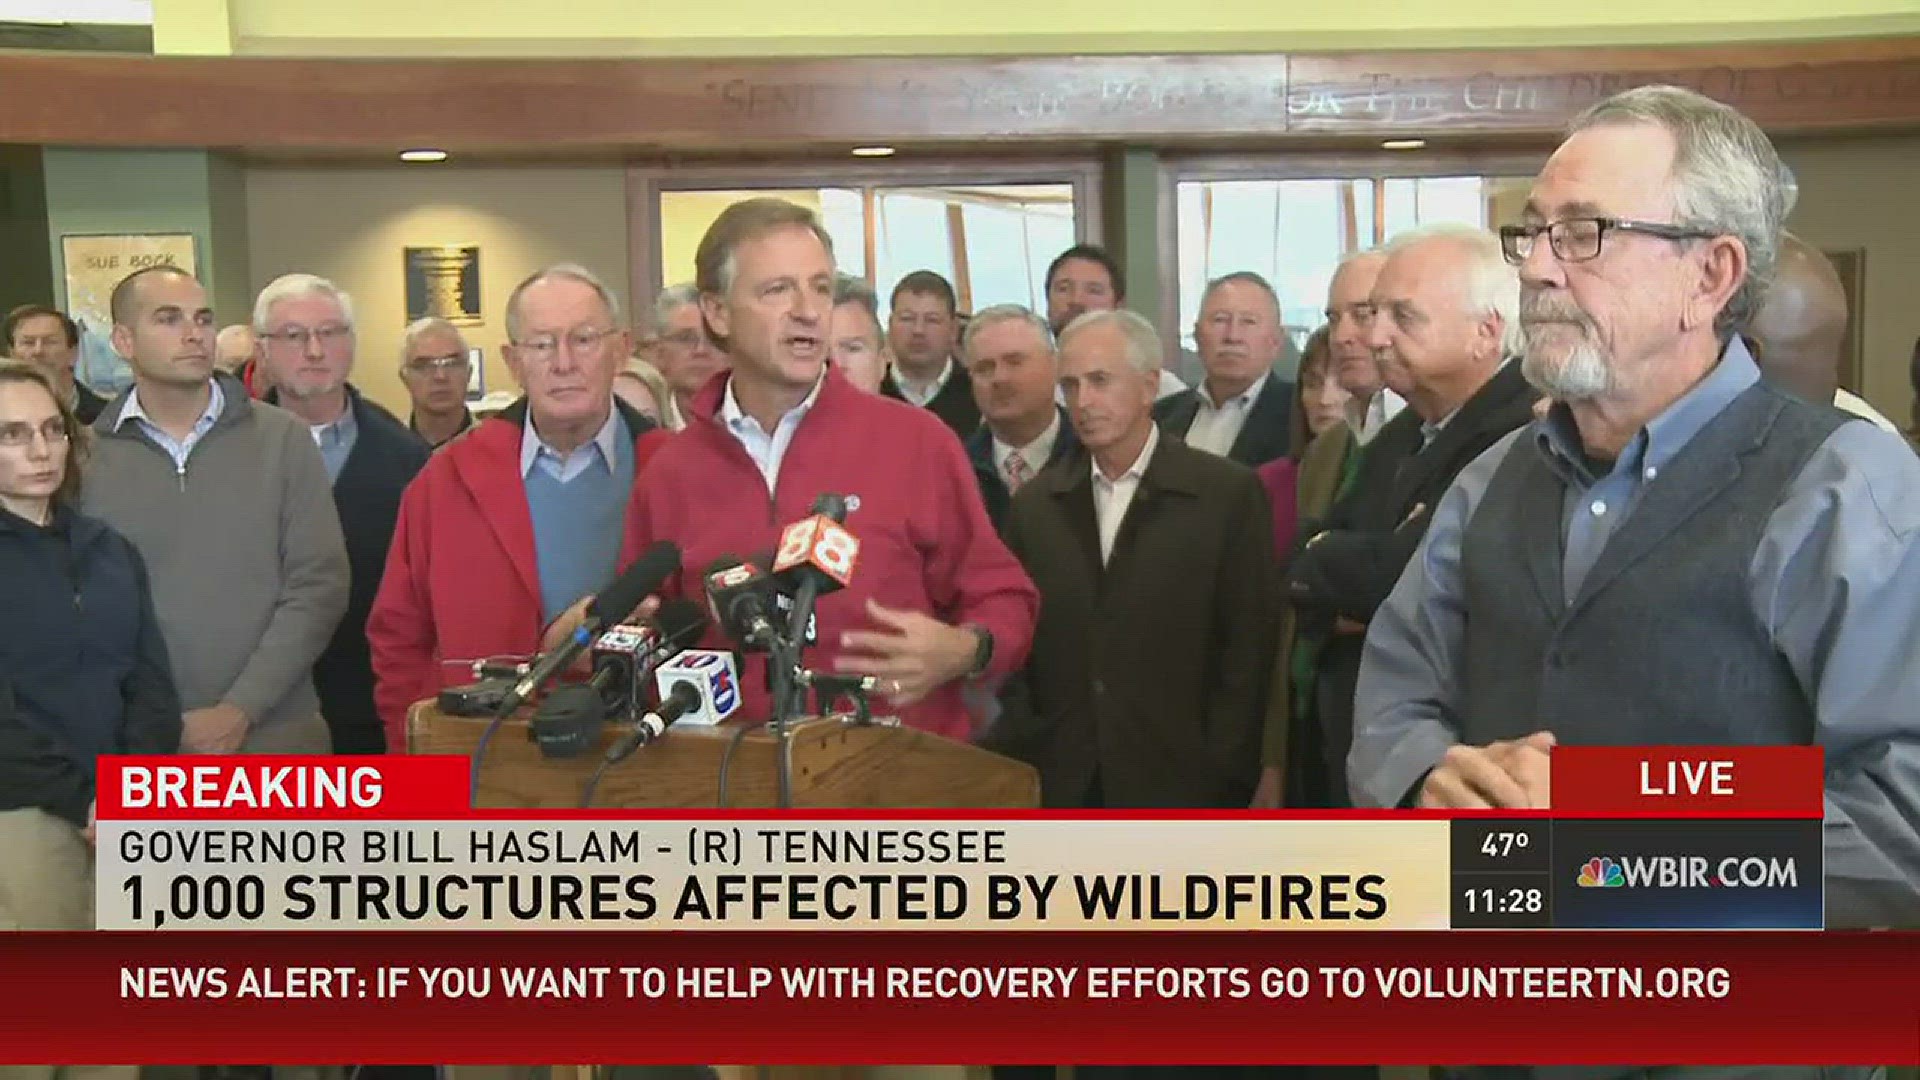 Gov. Bill Haslam on the Sevier County fires: "It's a group of people committed on doing this right."